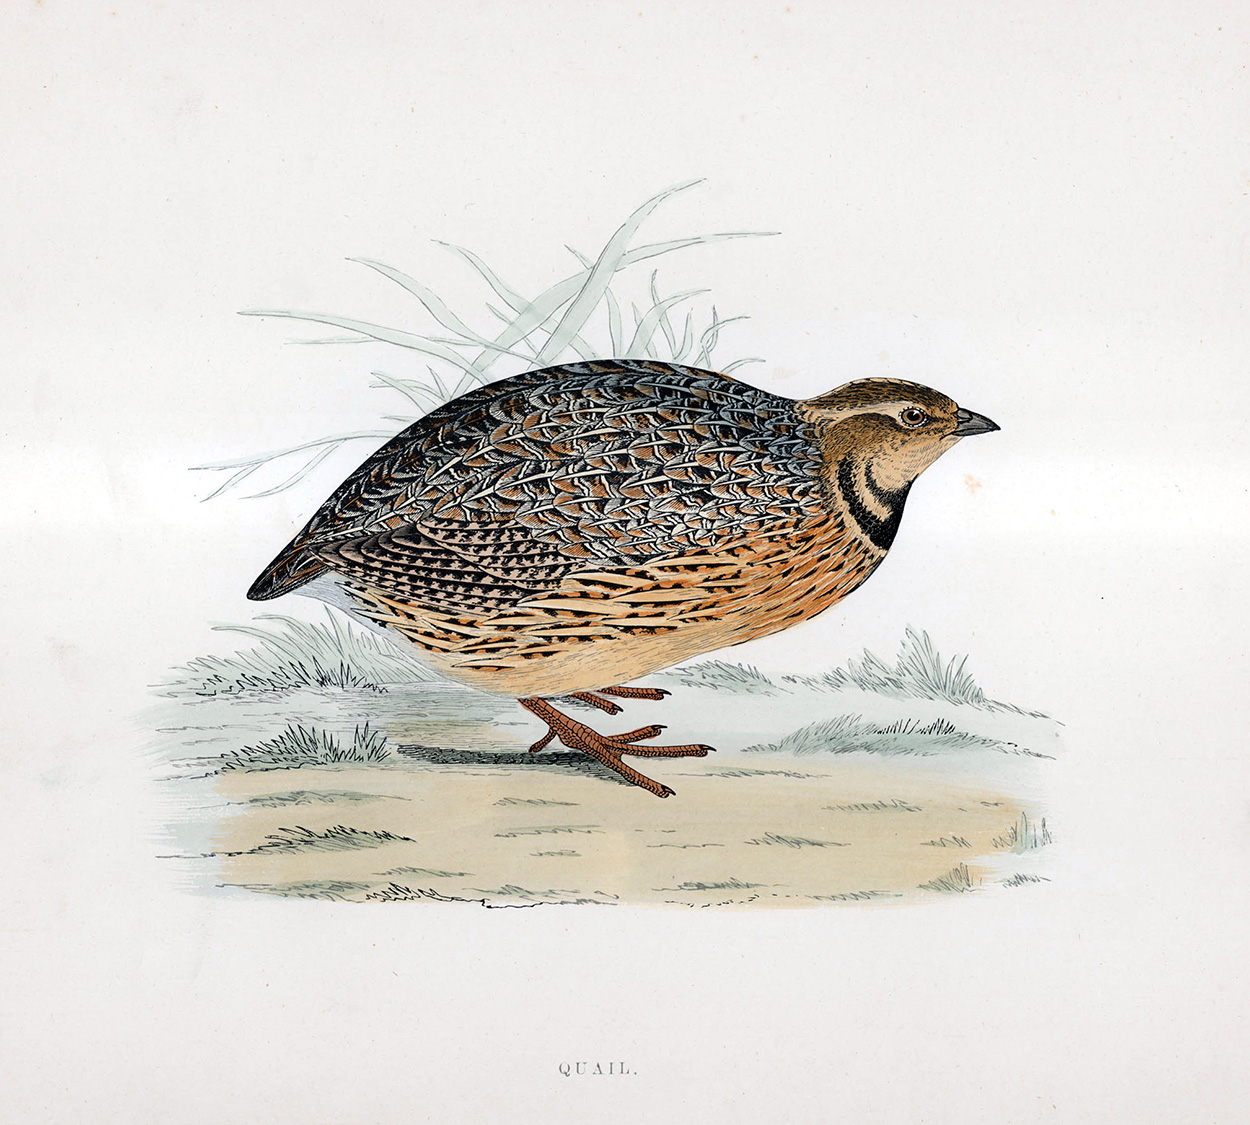 Quail - hand coloured lithograph 1891 (Print) art by Beverley R Morris Art at The Illustration Art Gallery